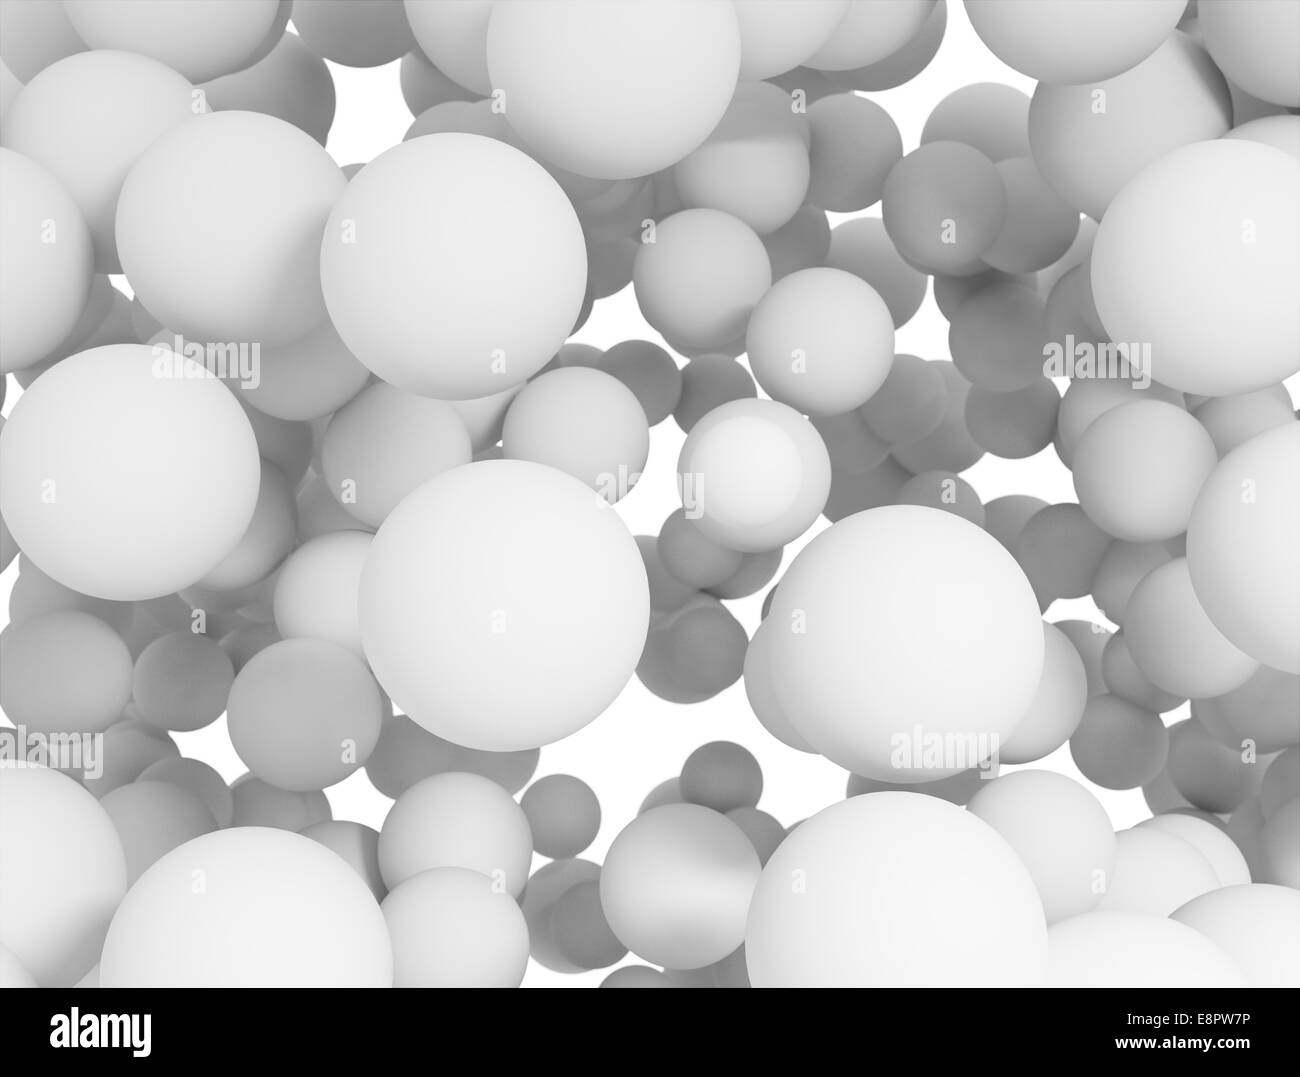 Abstract background with blank white spheres Stock Photo